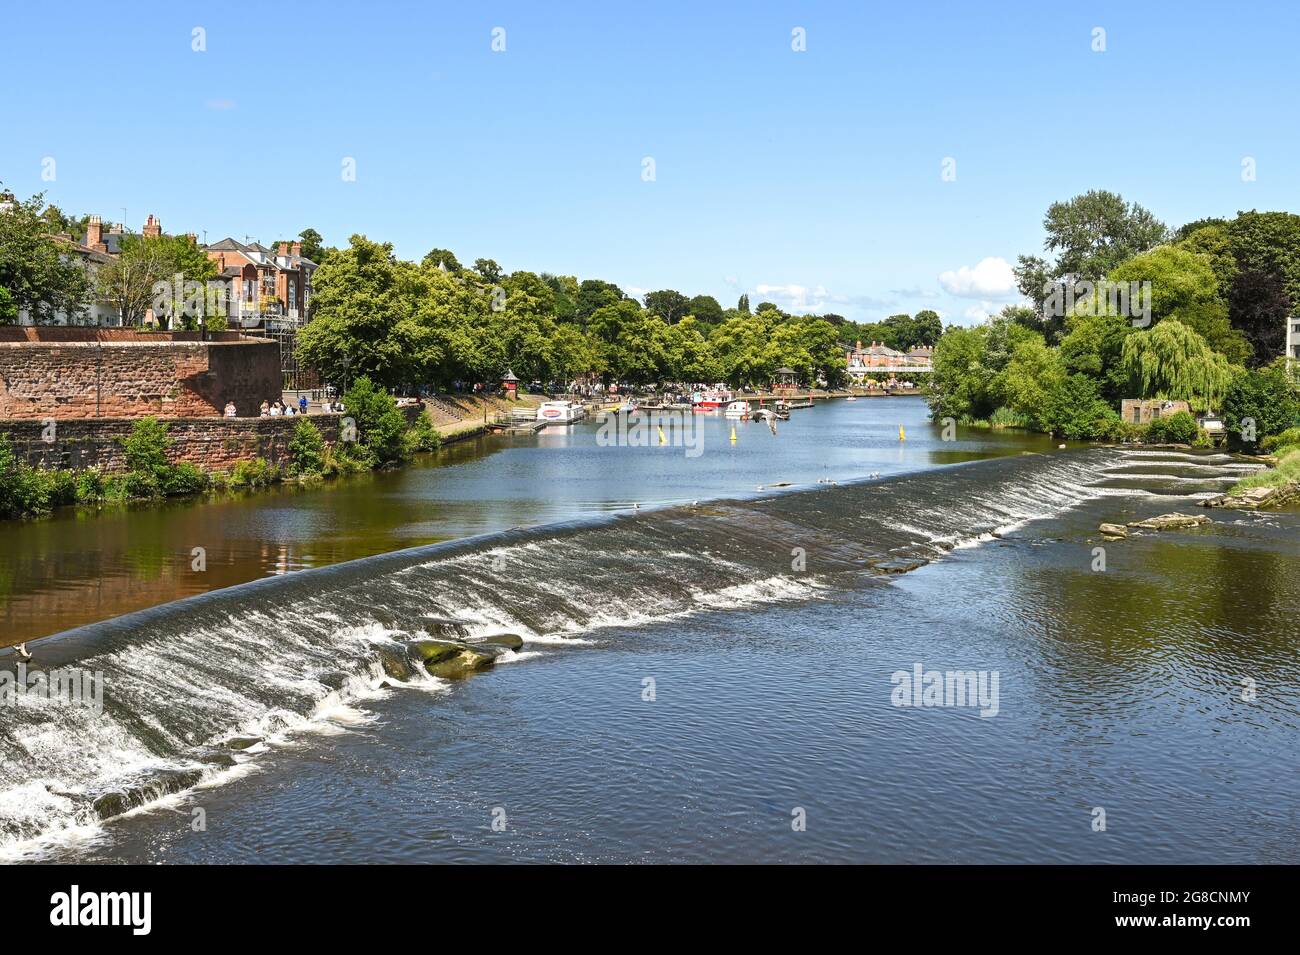 Chester, England - July 2021: Scenic view of boats on the River Dee, which flows through the city. In the foreground is a weir and fish pass. Stock Photo